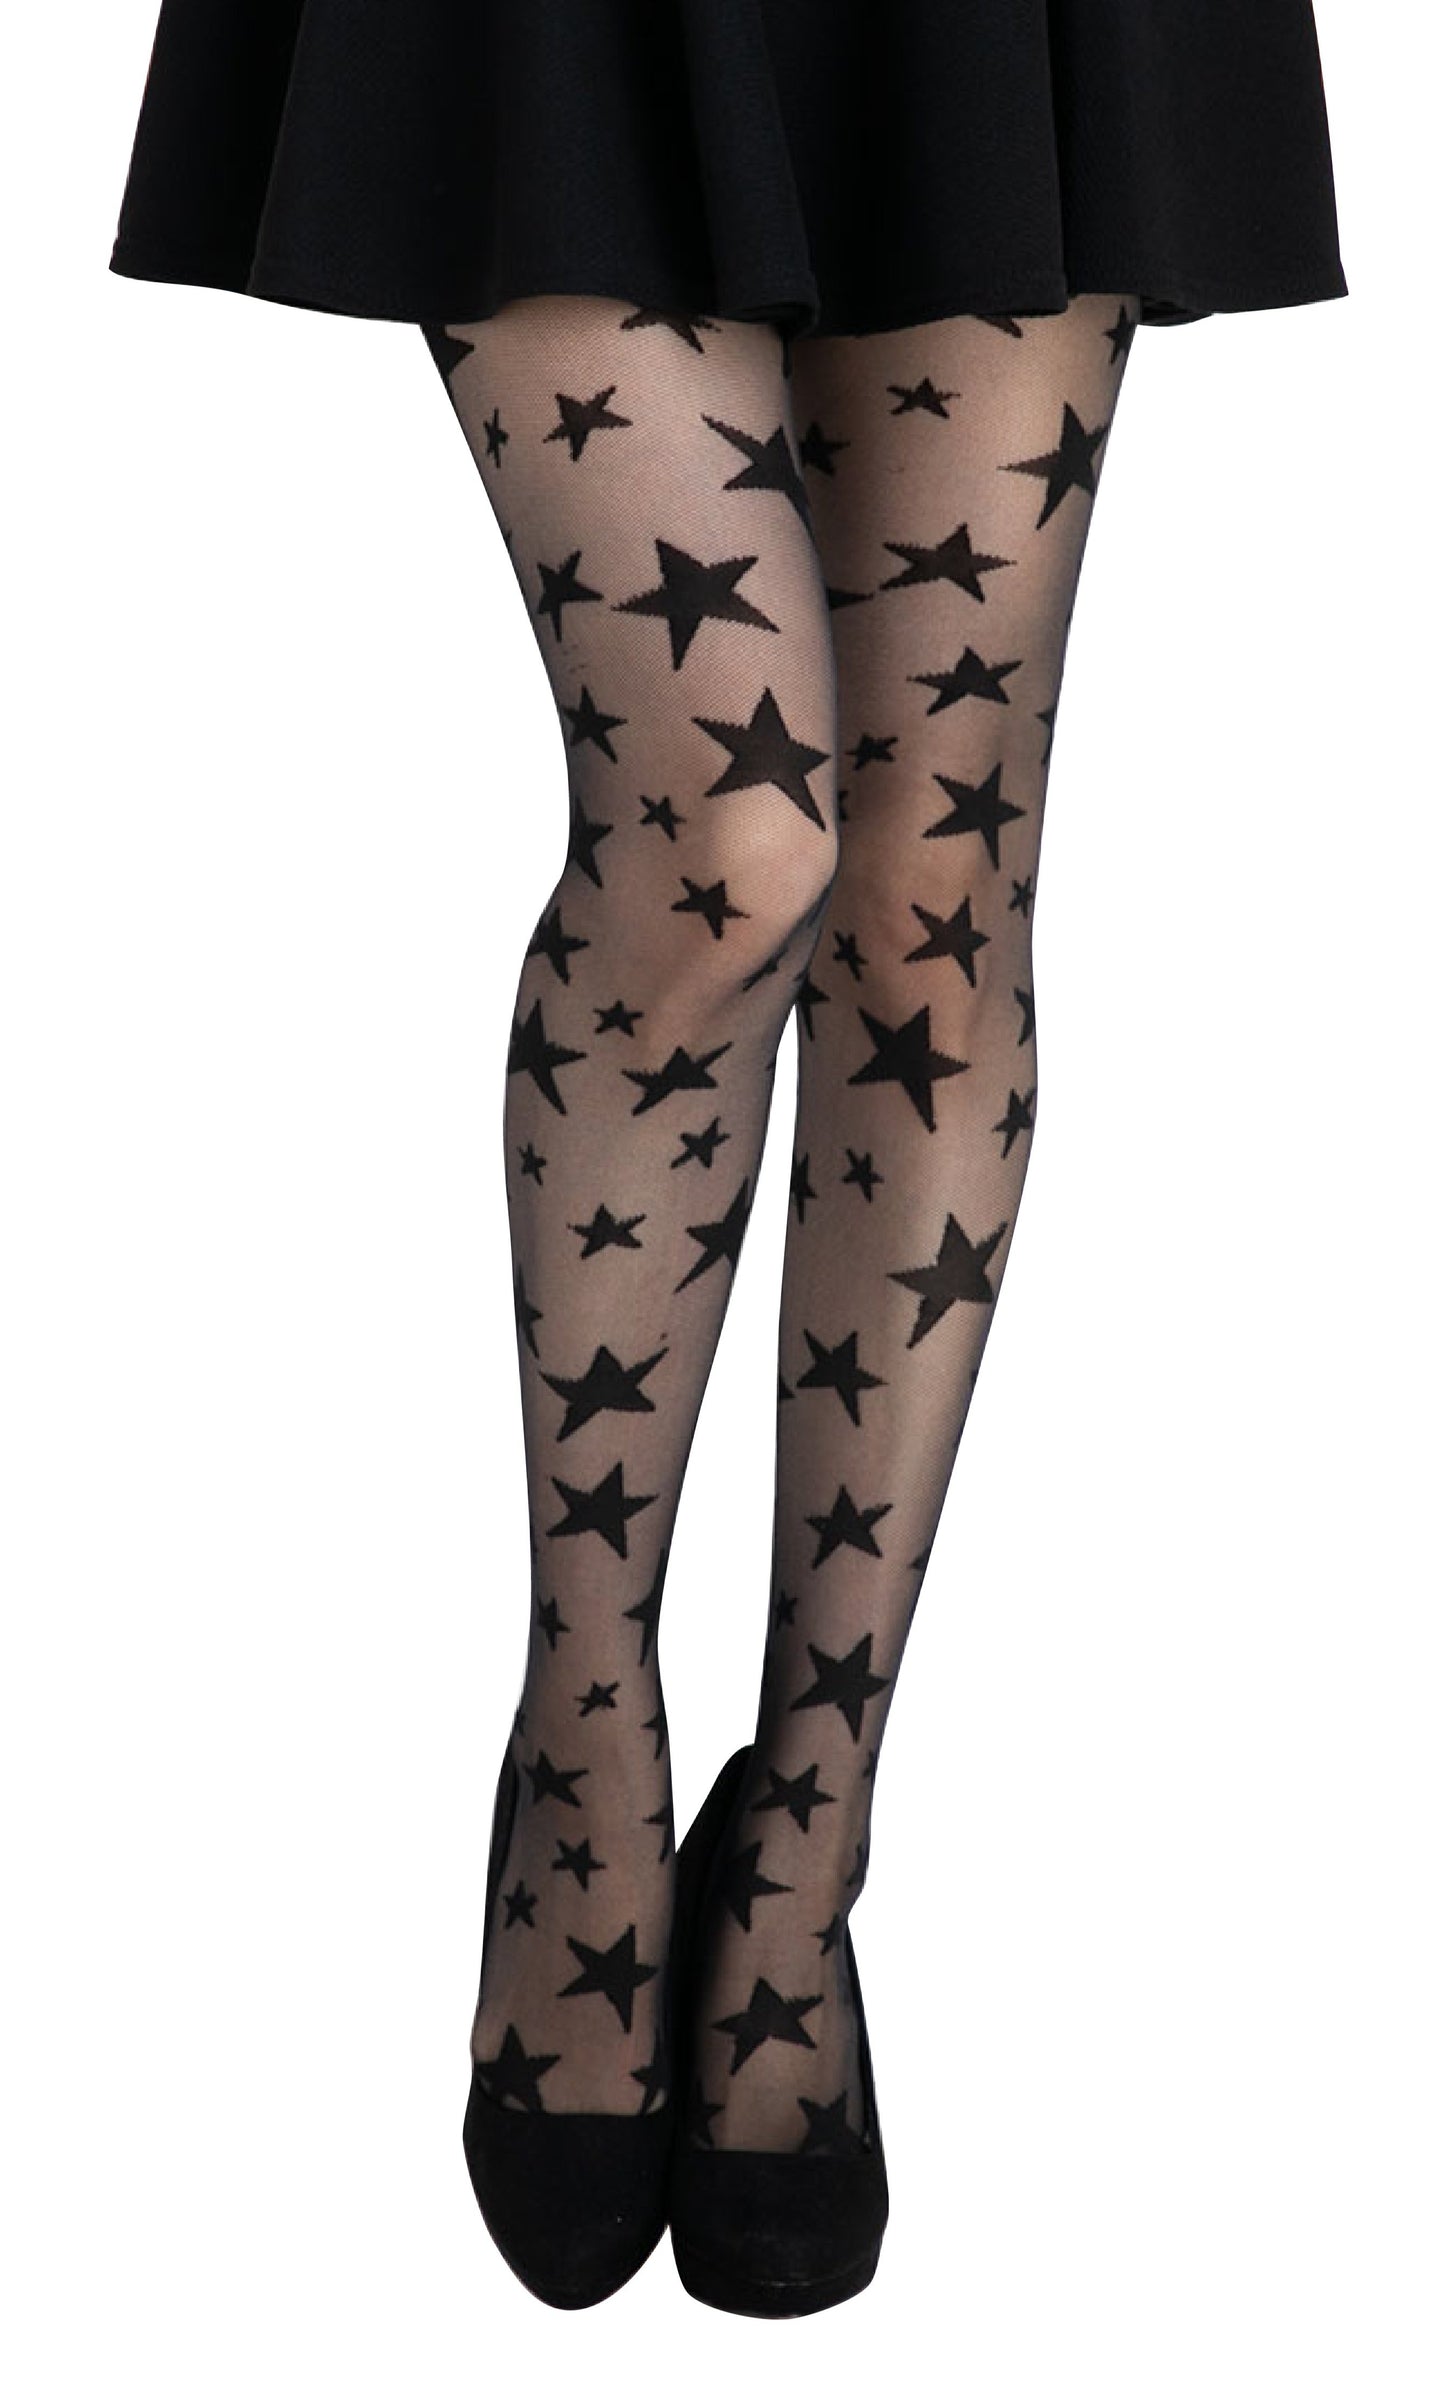 Trasparenze Durian Collant - sheer nude tights with black stars pattern